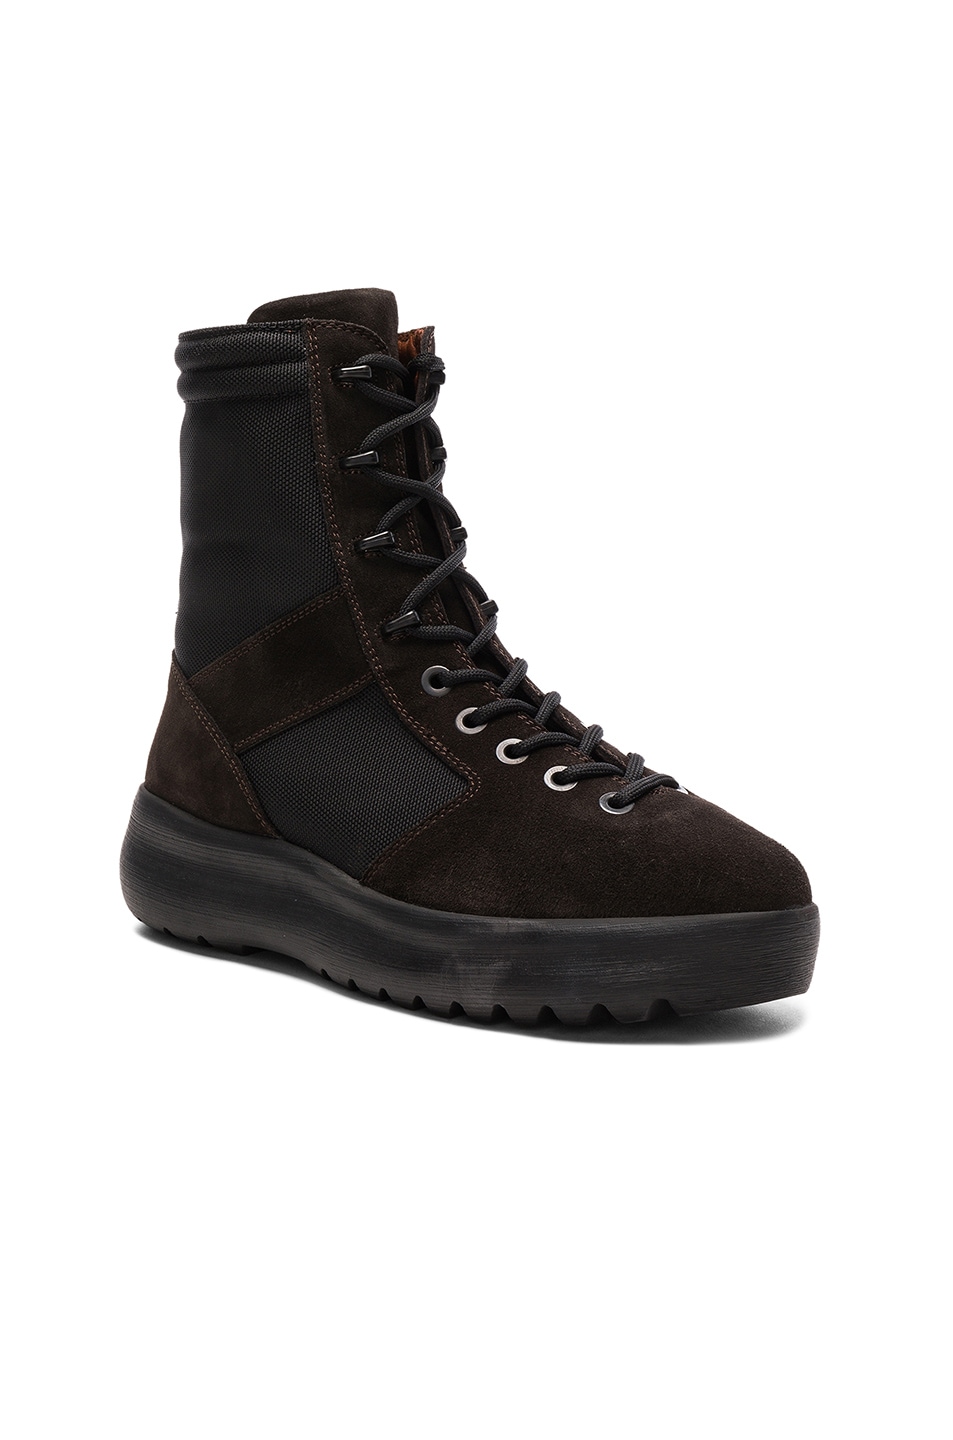 Image 1 of YEEZY Season 3 Military Boots in Onyx Shade